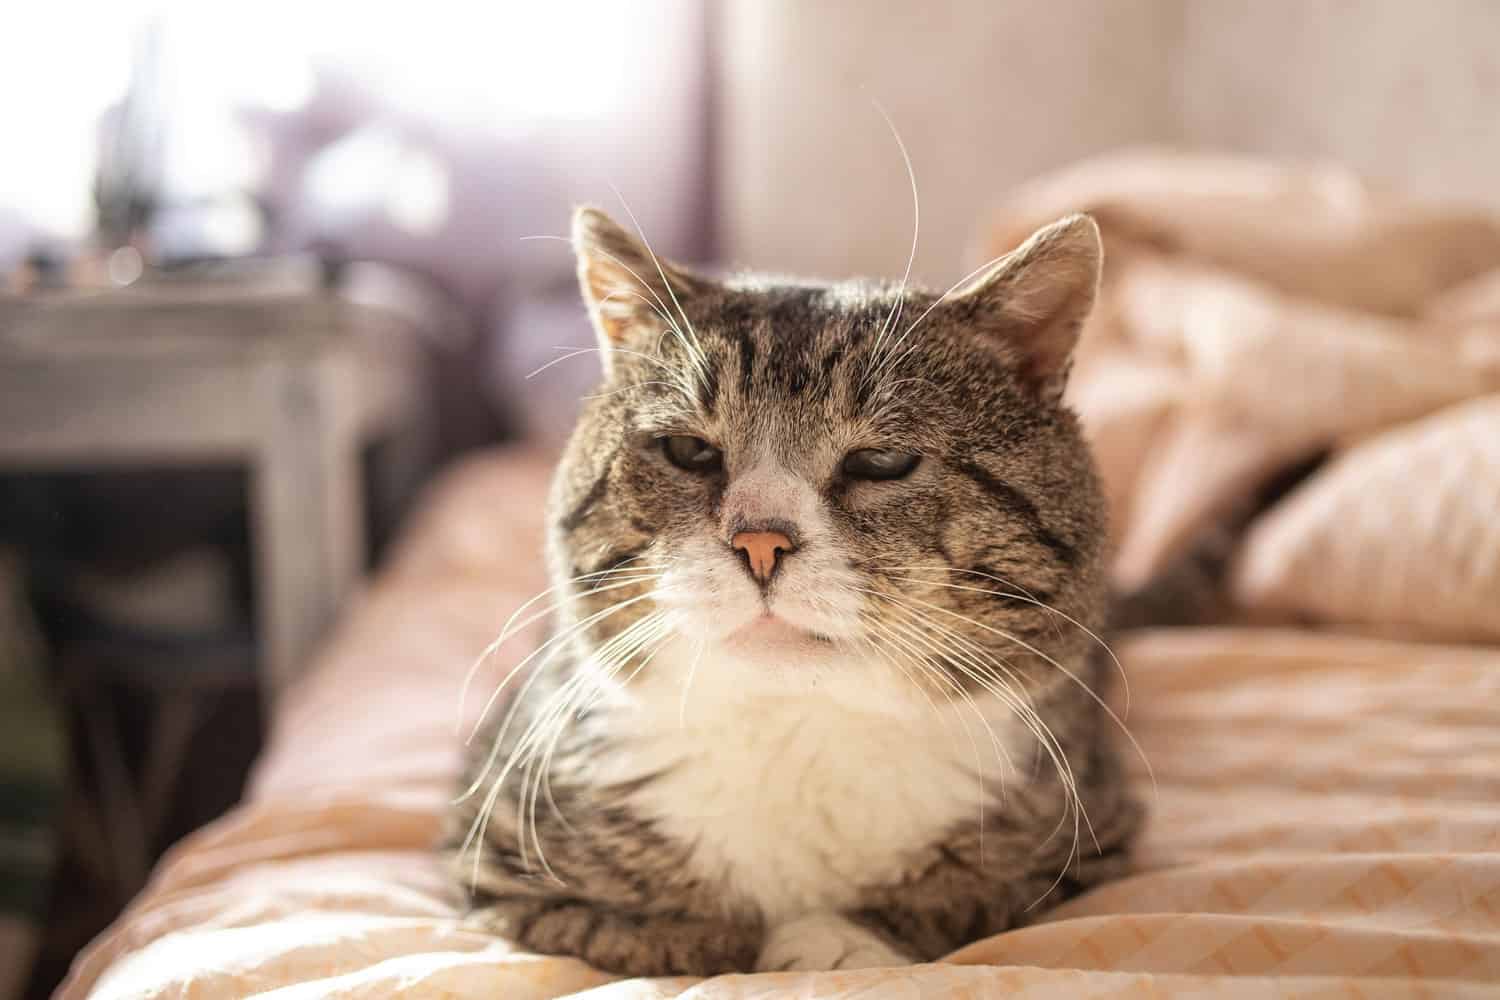 A tired old cat resting on the bed